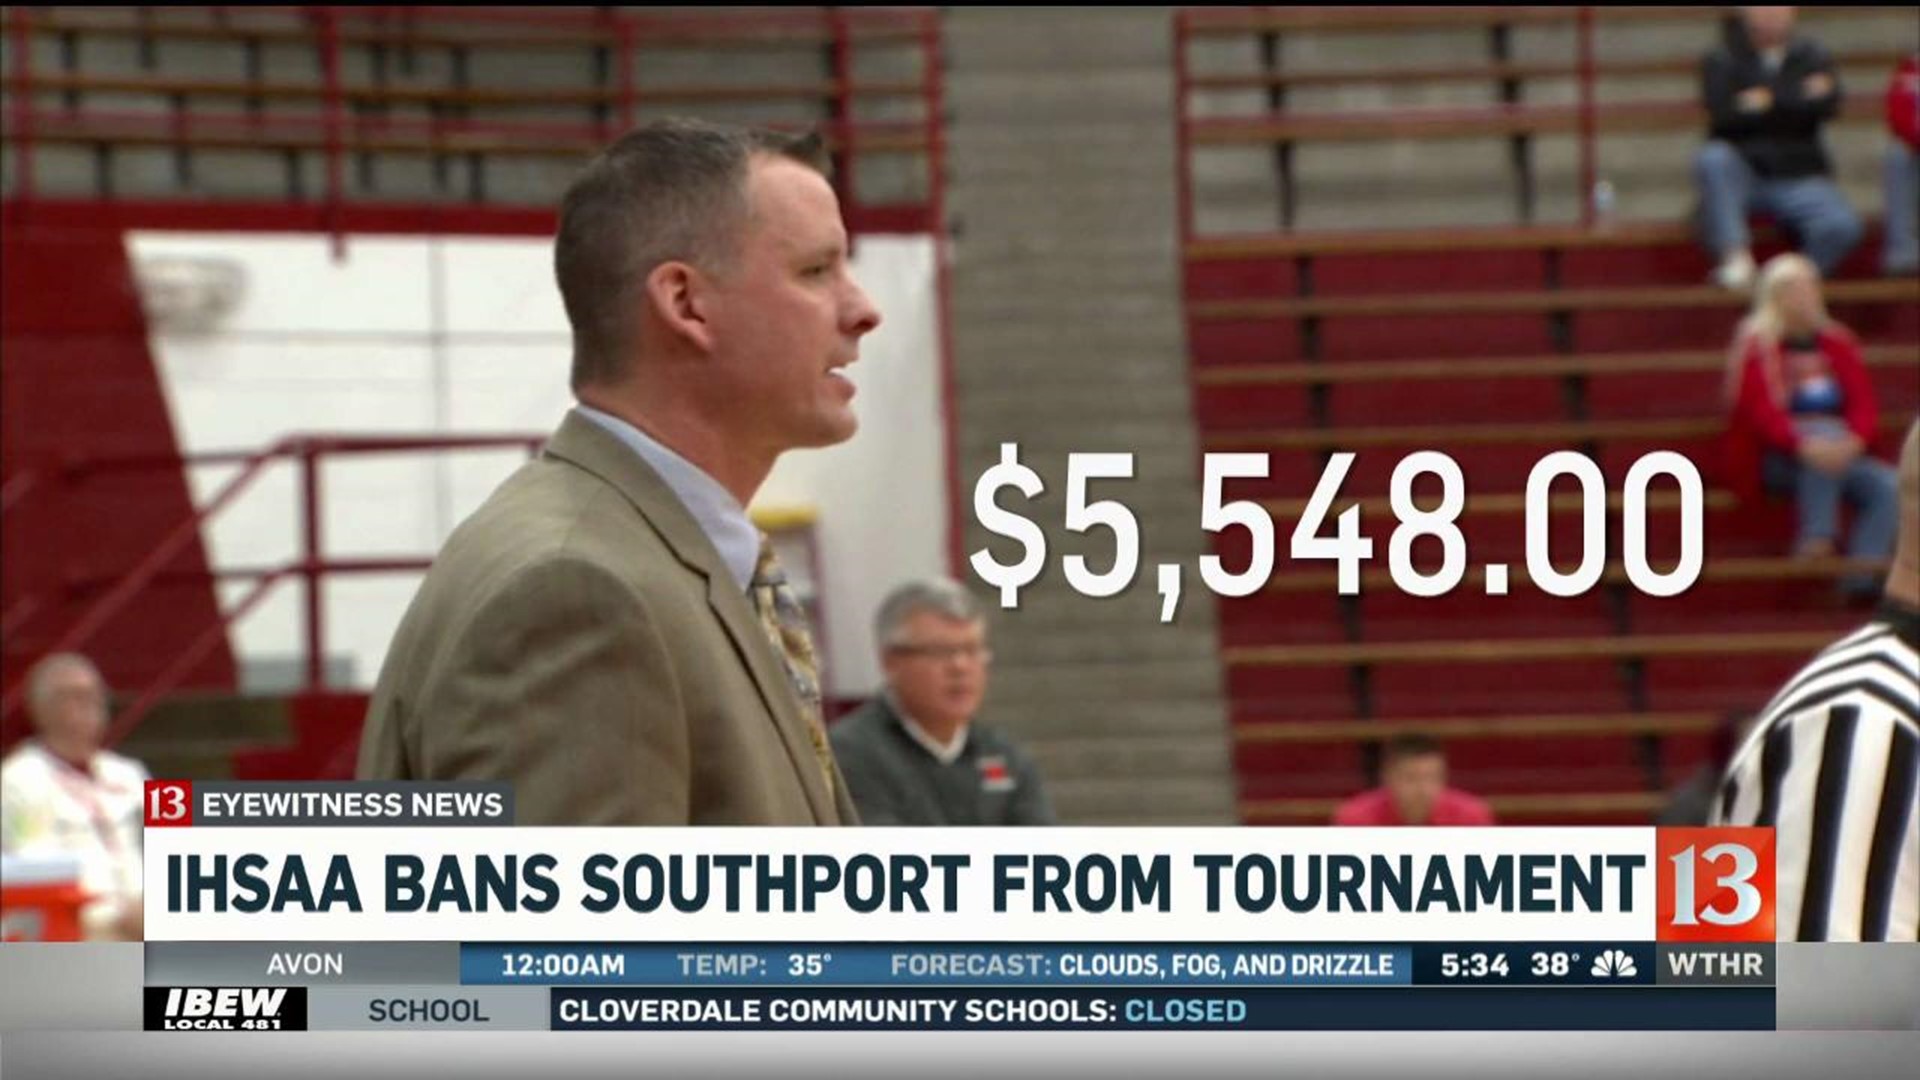 IHSAA bans Southport from tournament